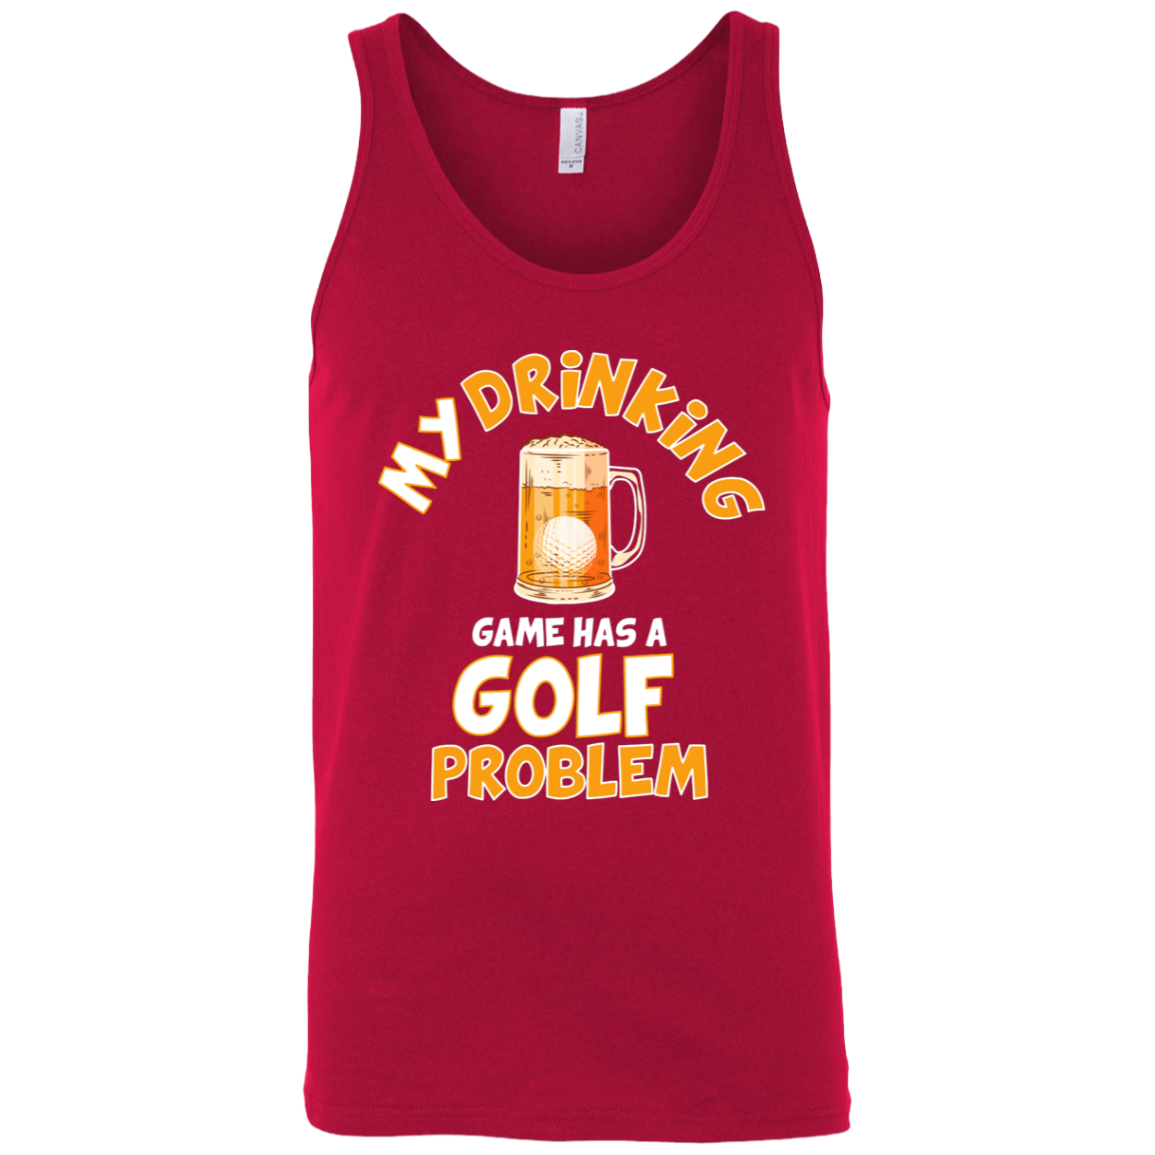 My Drinking Game Has A Golf Problem Tank Top Apparel - The Beer Lodge